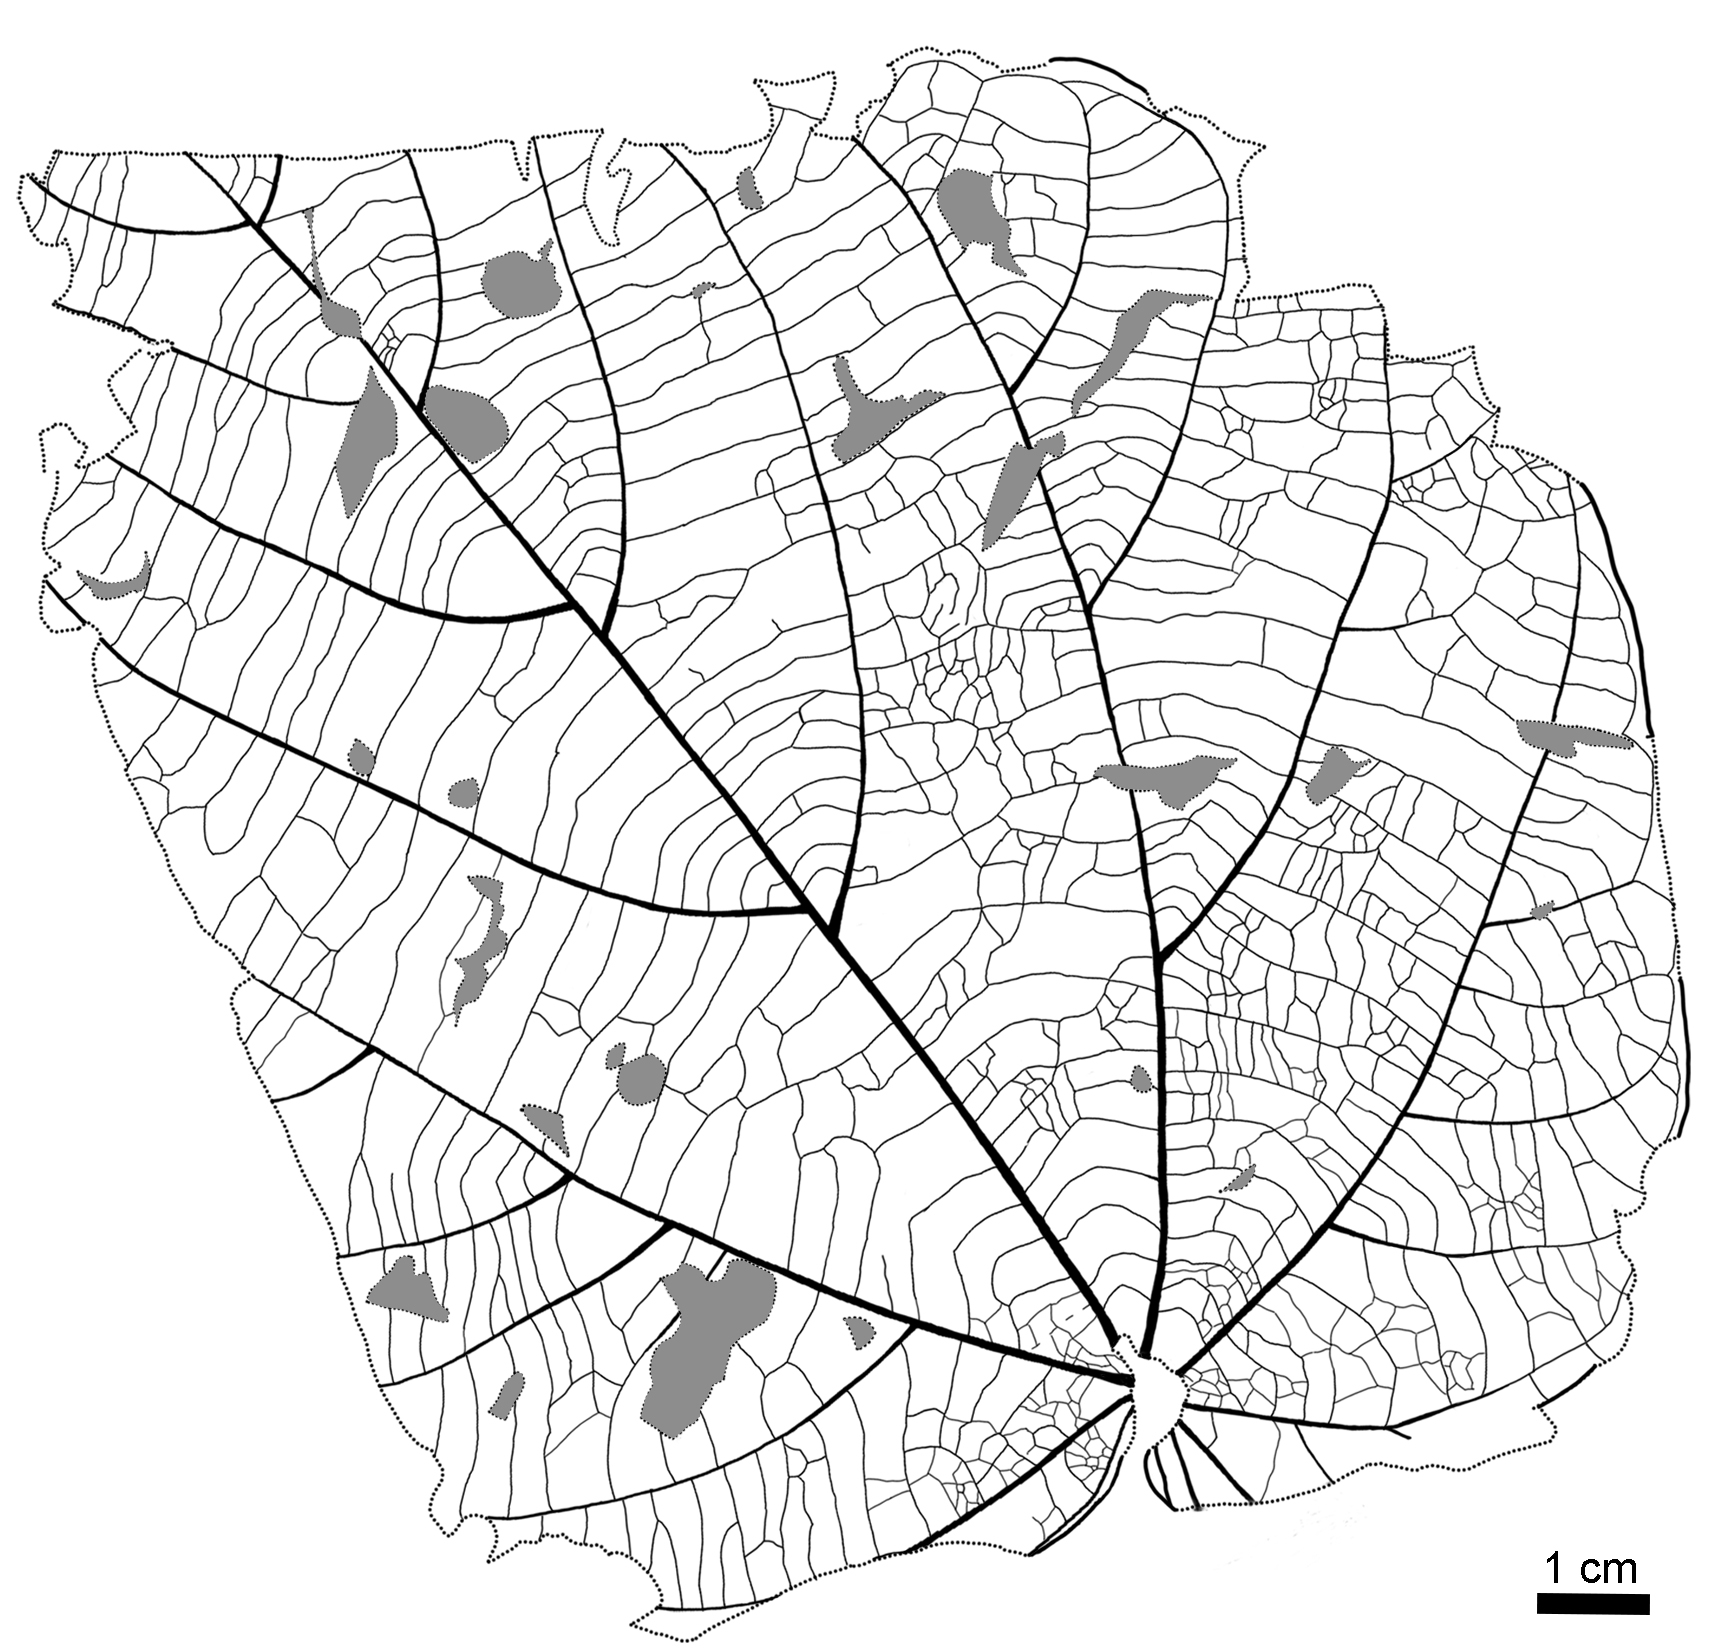 Line drawing of one of the Byttneriophyllum tiliifolium leaves found abundantly in the fossil forest. (Nishino et al., Scientific Reports, June 22, 2023)